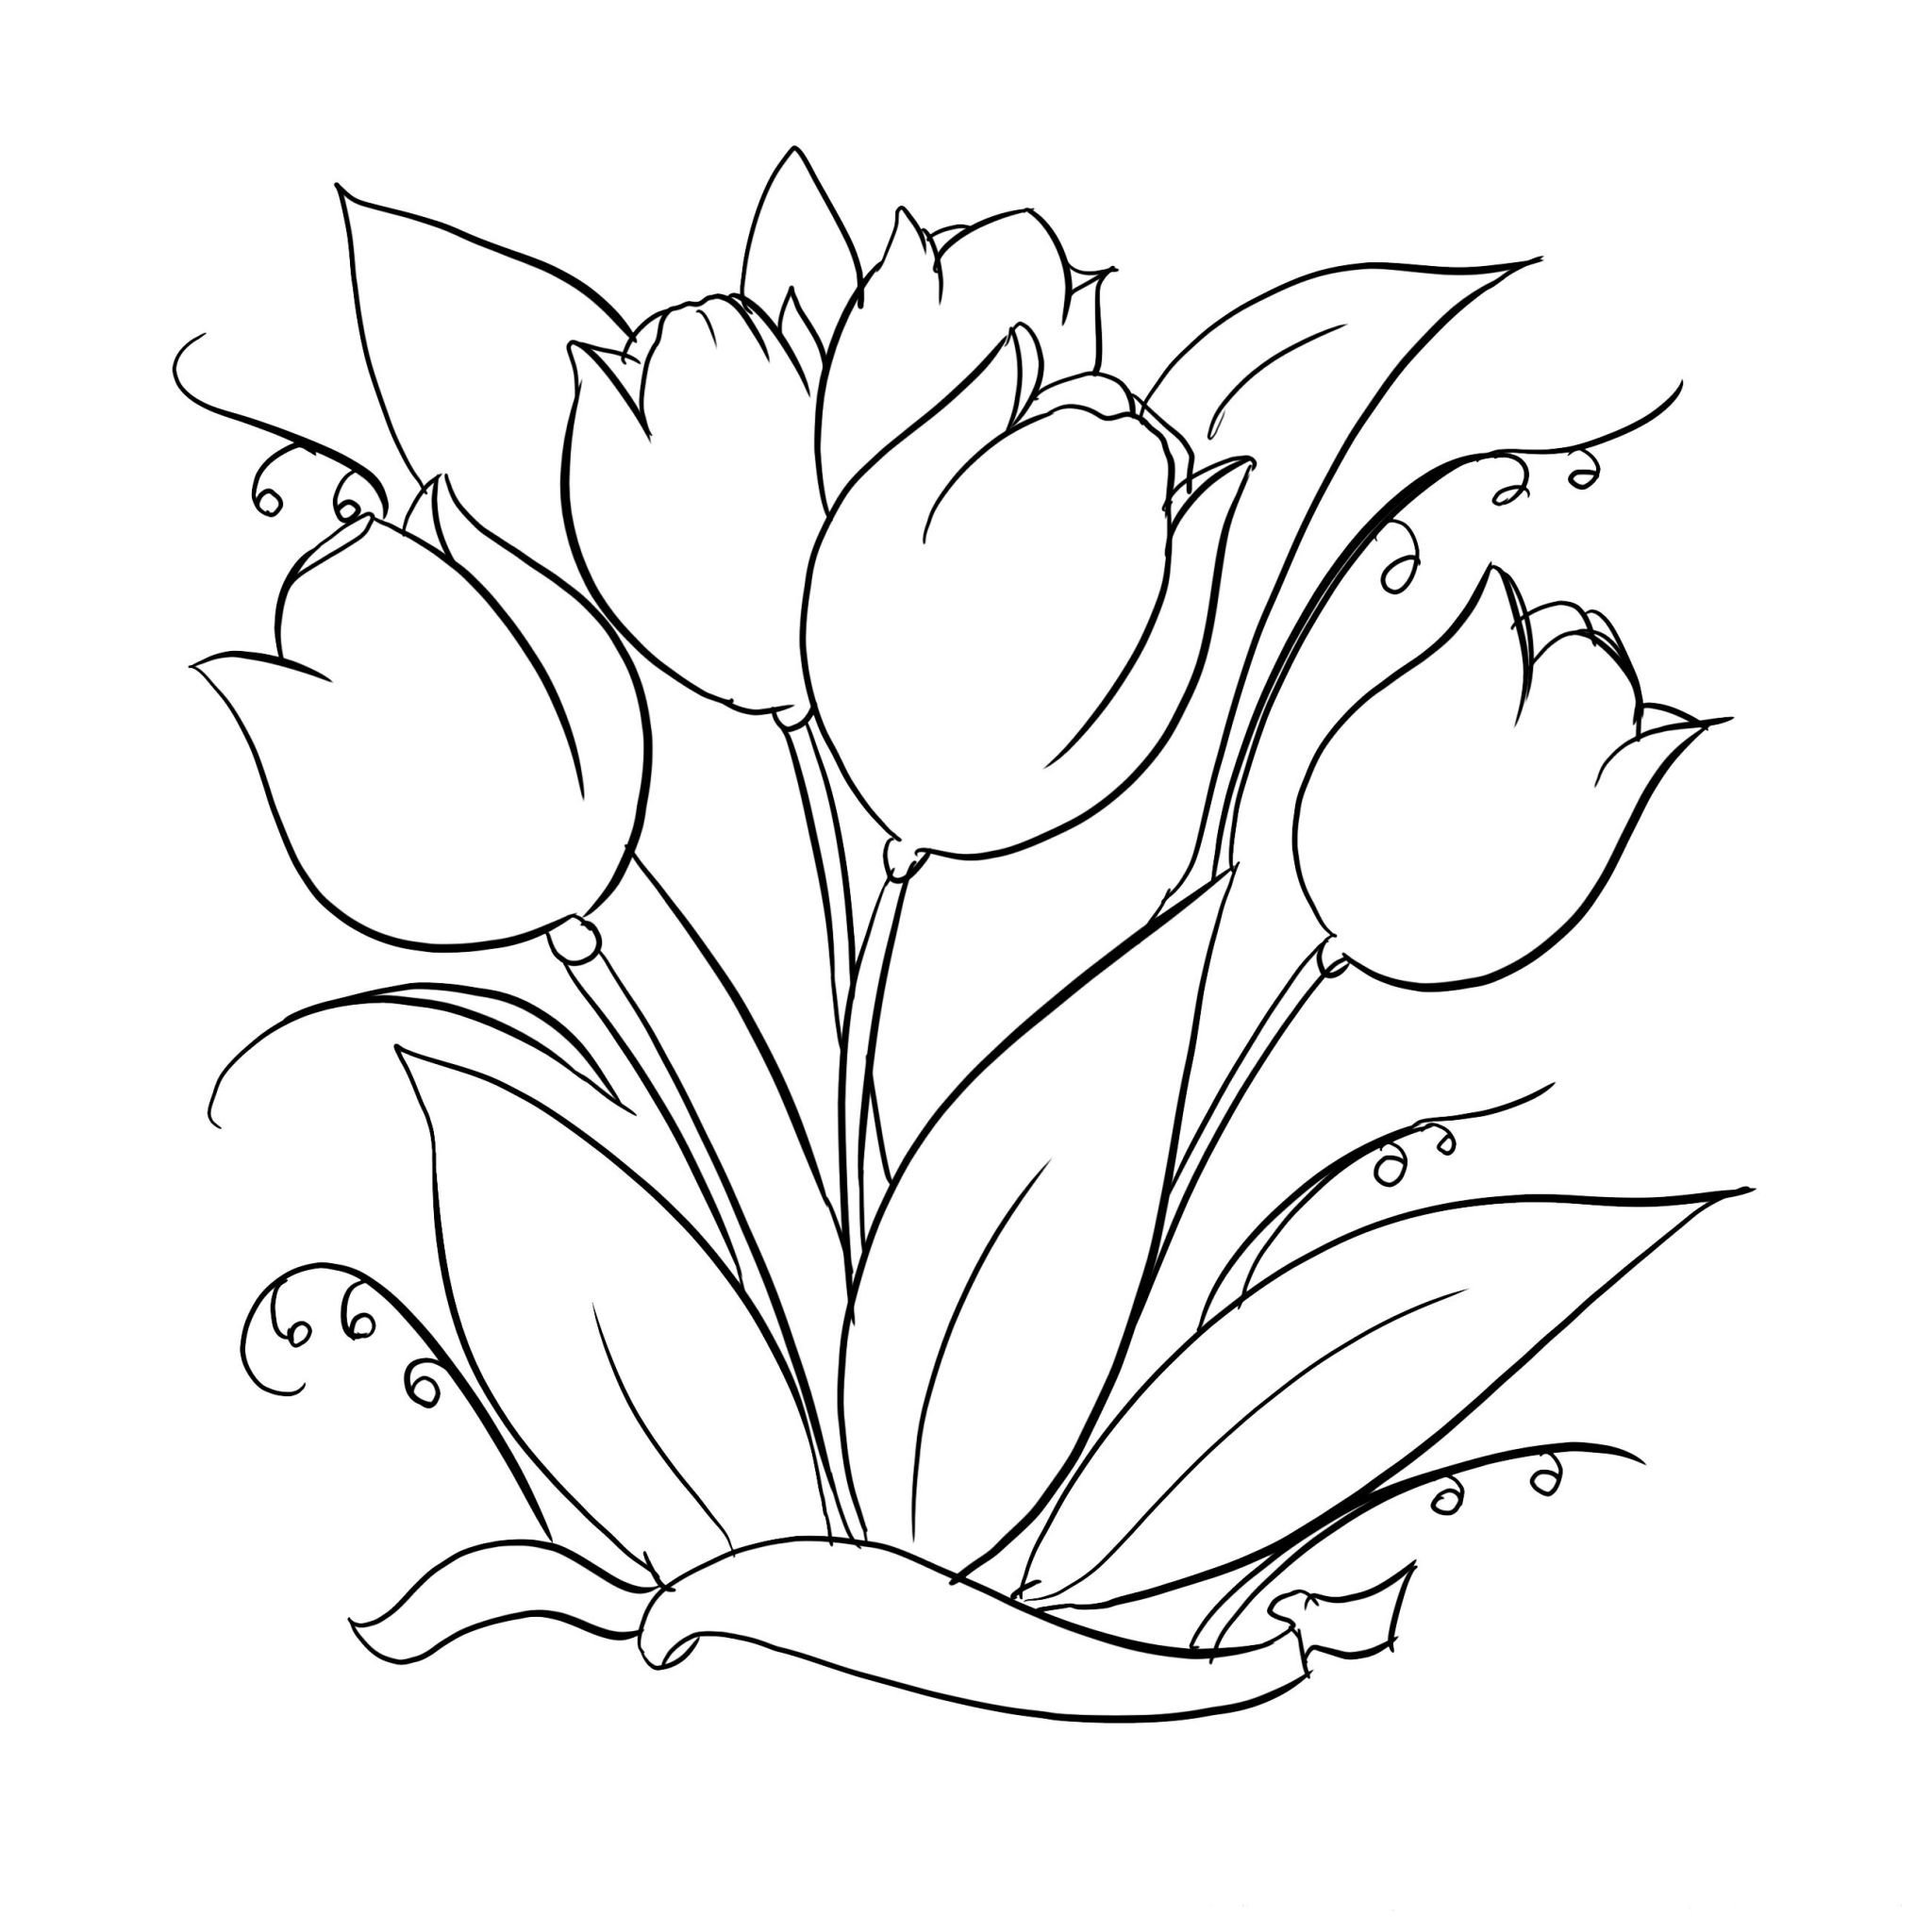 Exquisite tulips coloring for children 5-6 years old